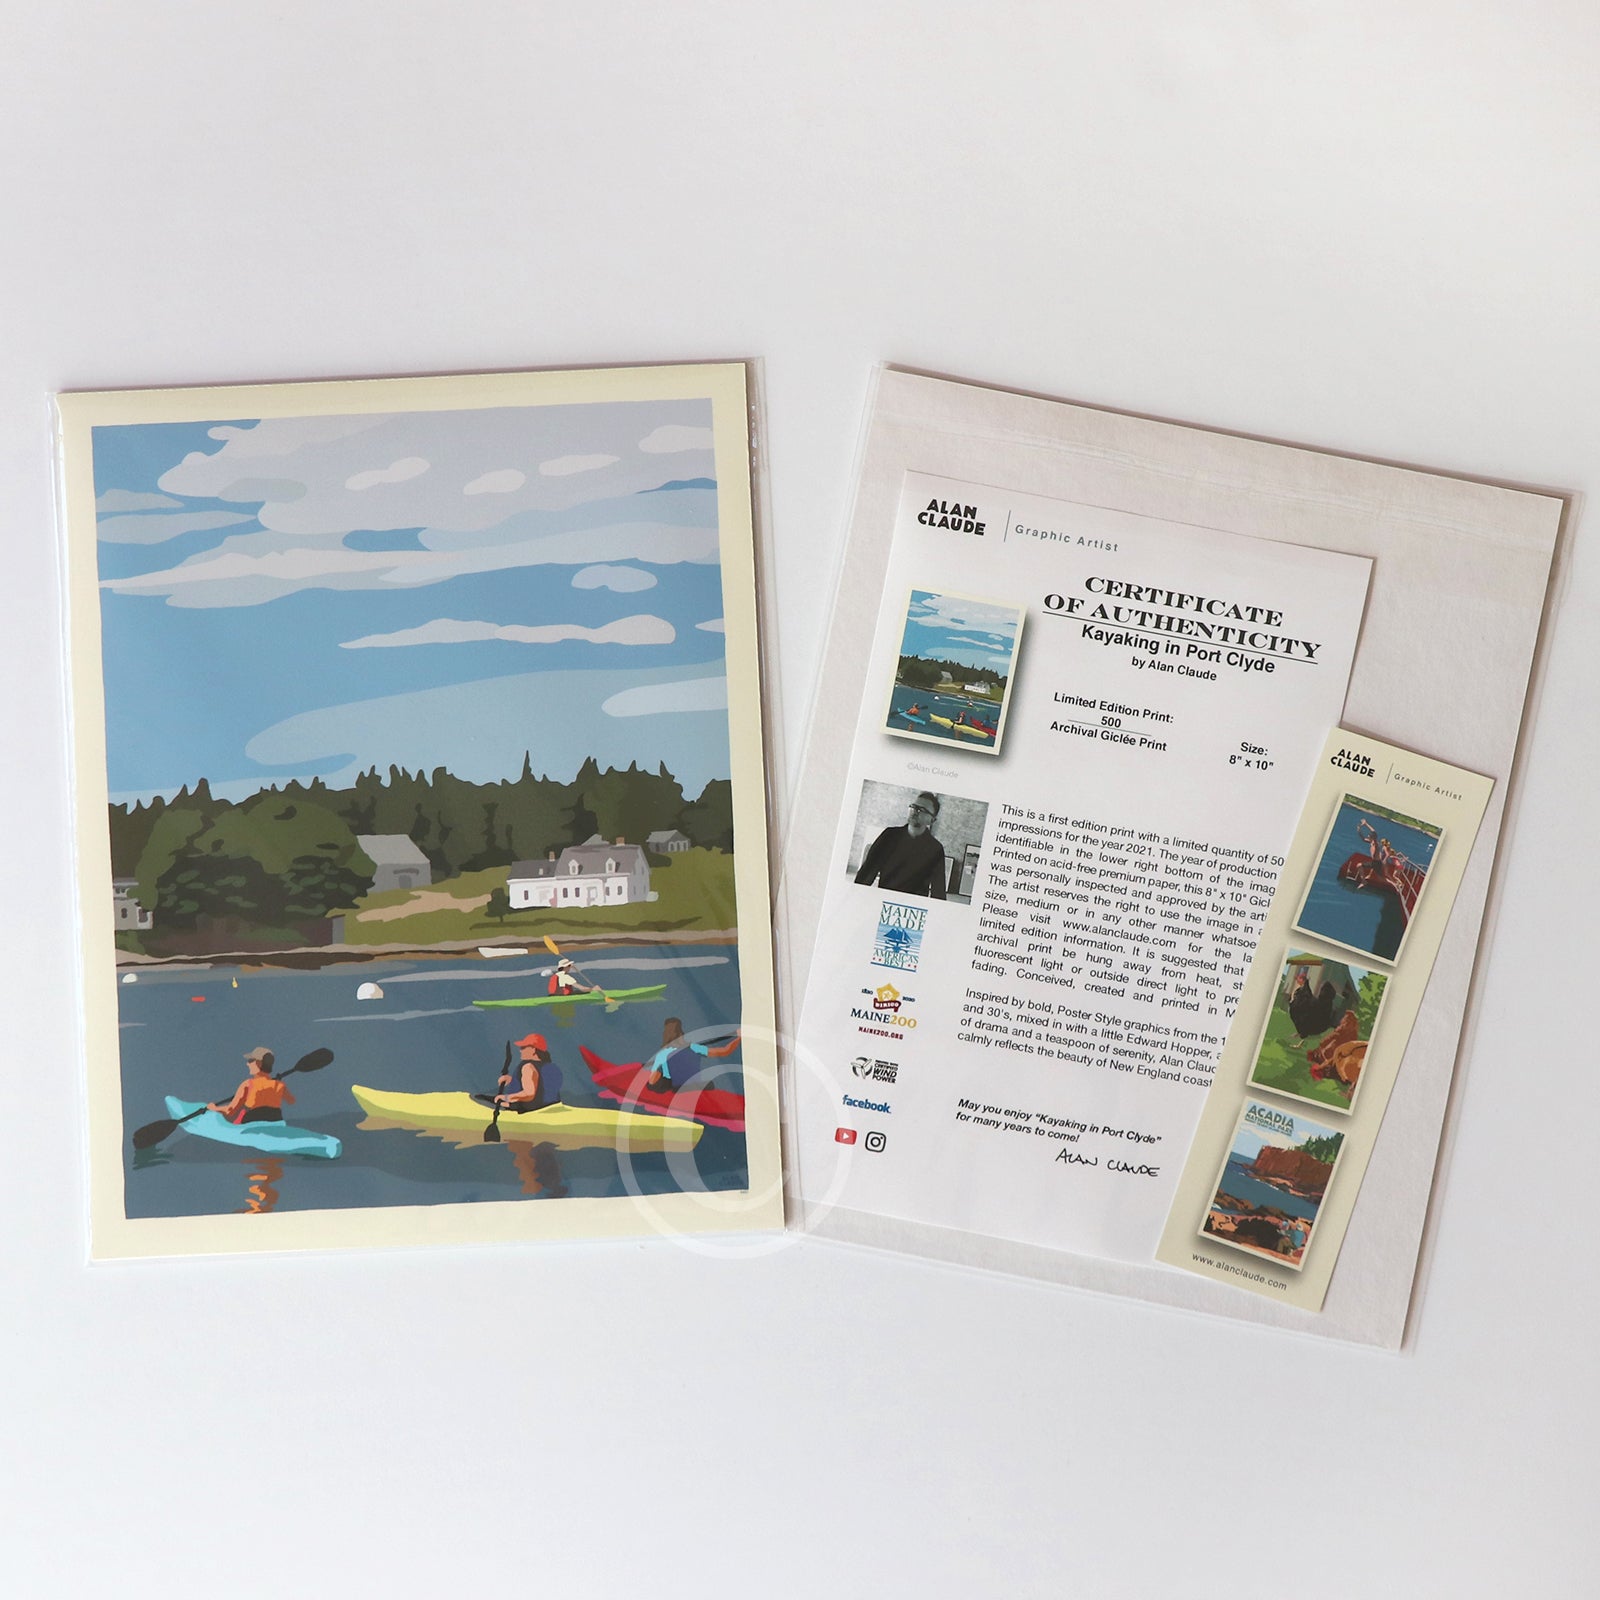 Kayaking in Port Clyde Art Print 8" x 10" Wall Poster By Alan Claude - Maine